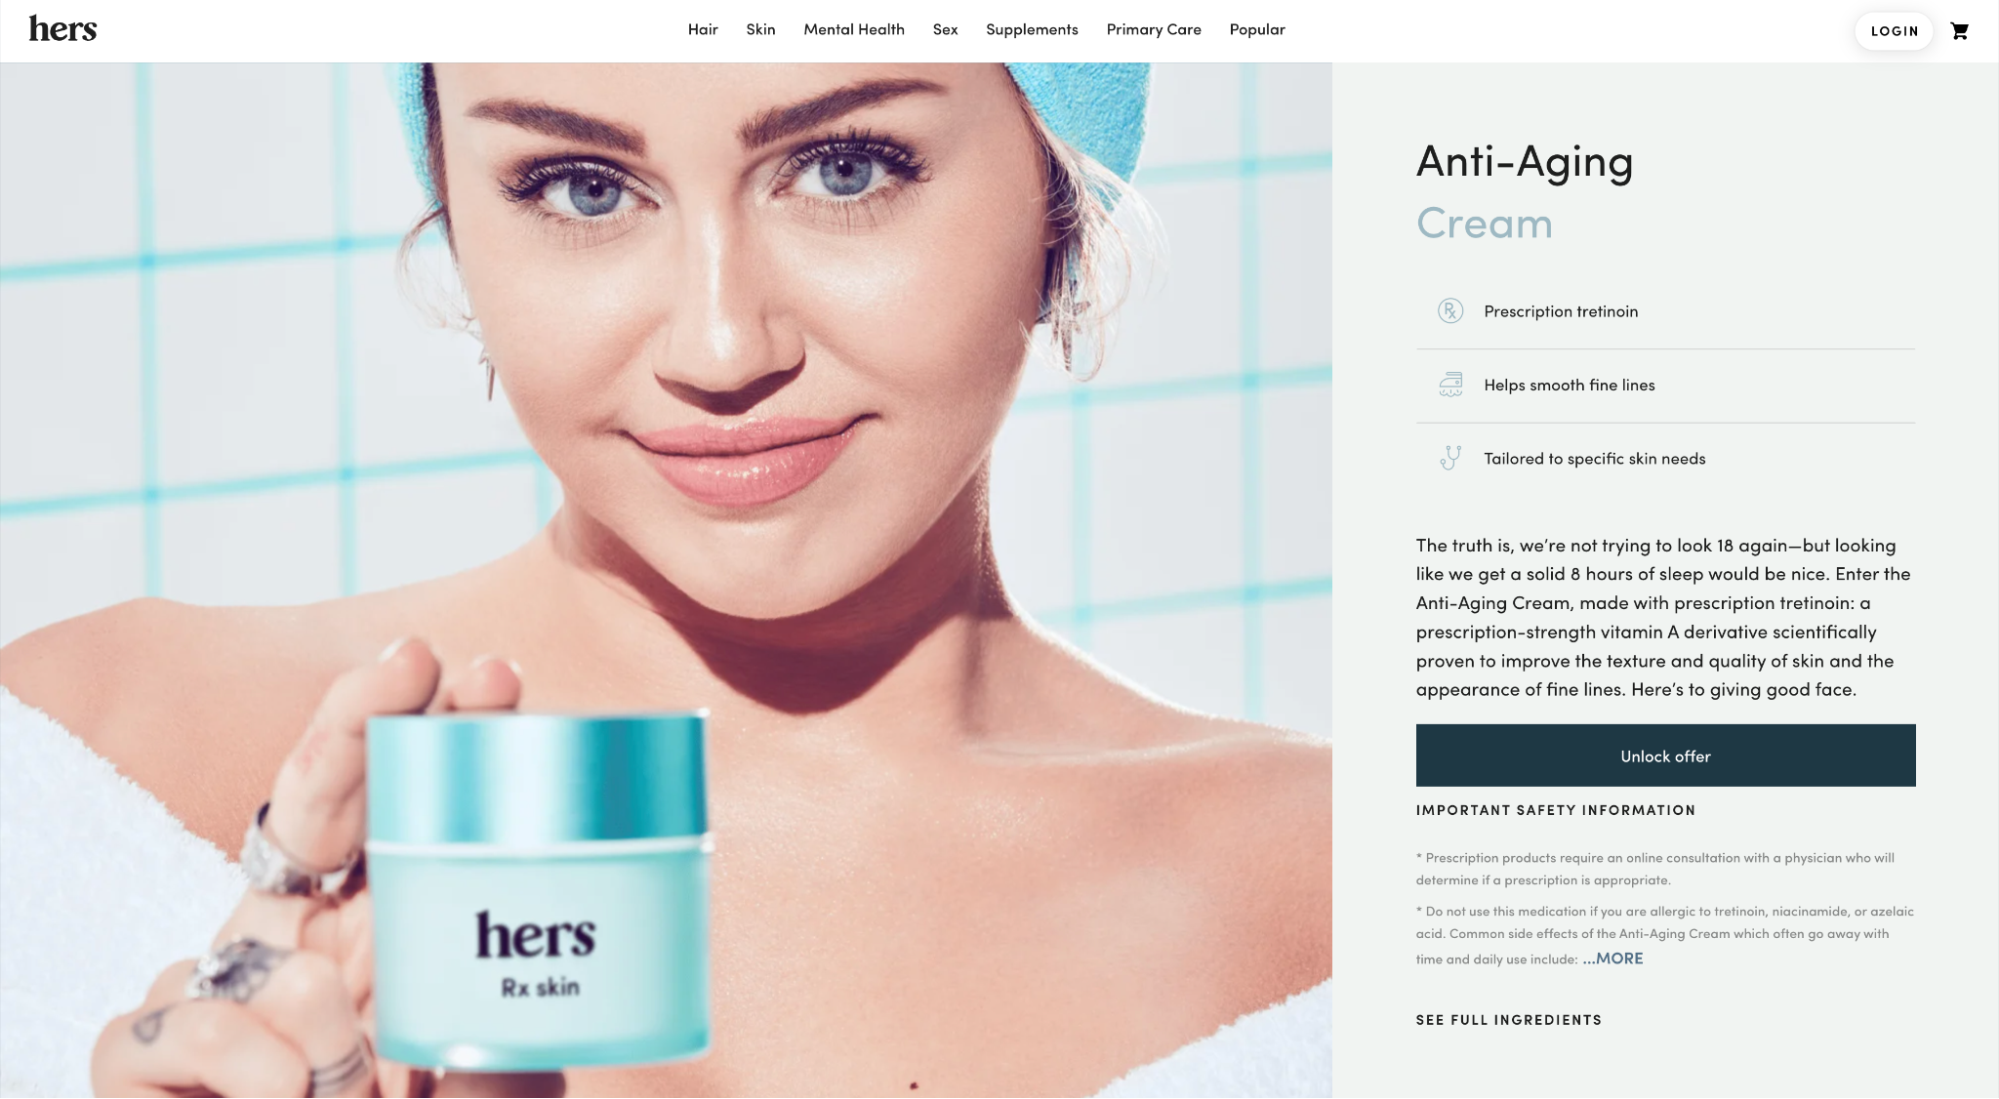 Hers landing page